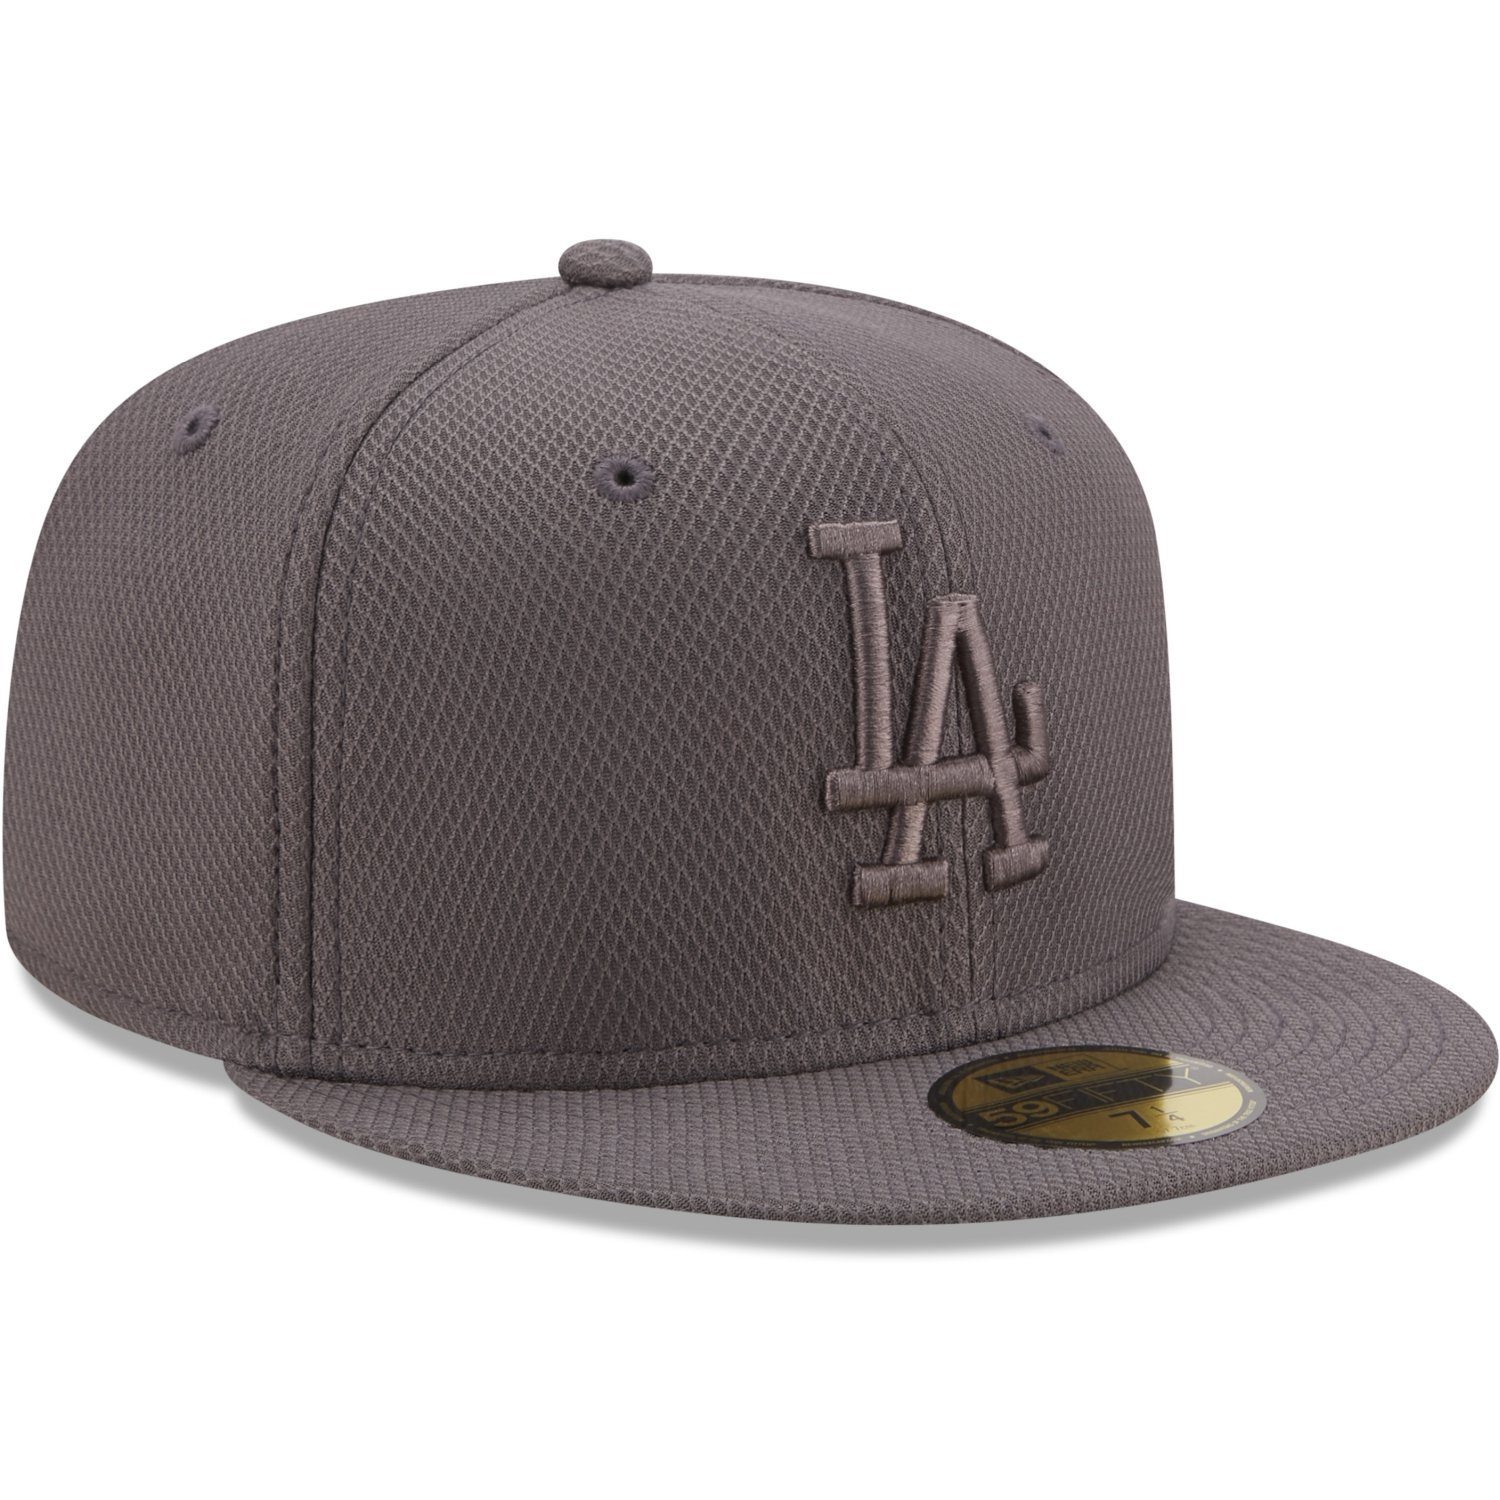 New Los DIAMOND Cap Dodgers Era 59Fifty Fitted Angeles